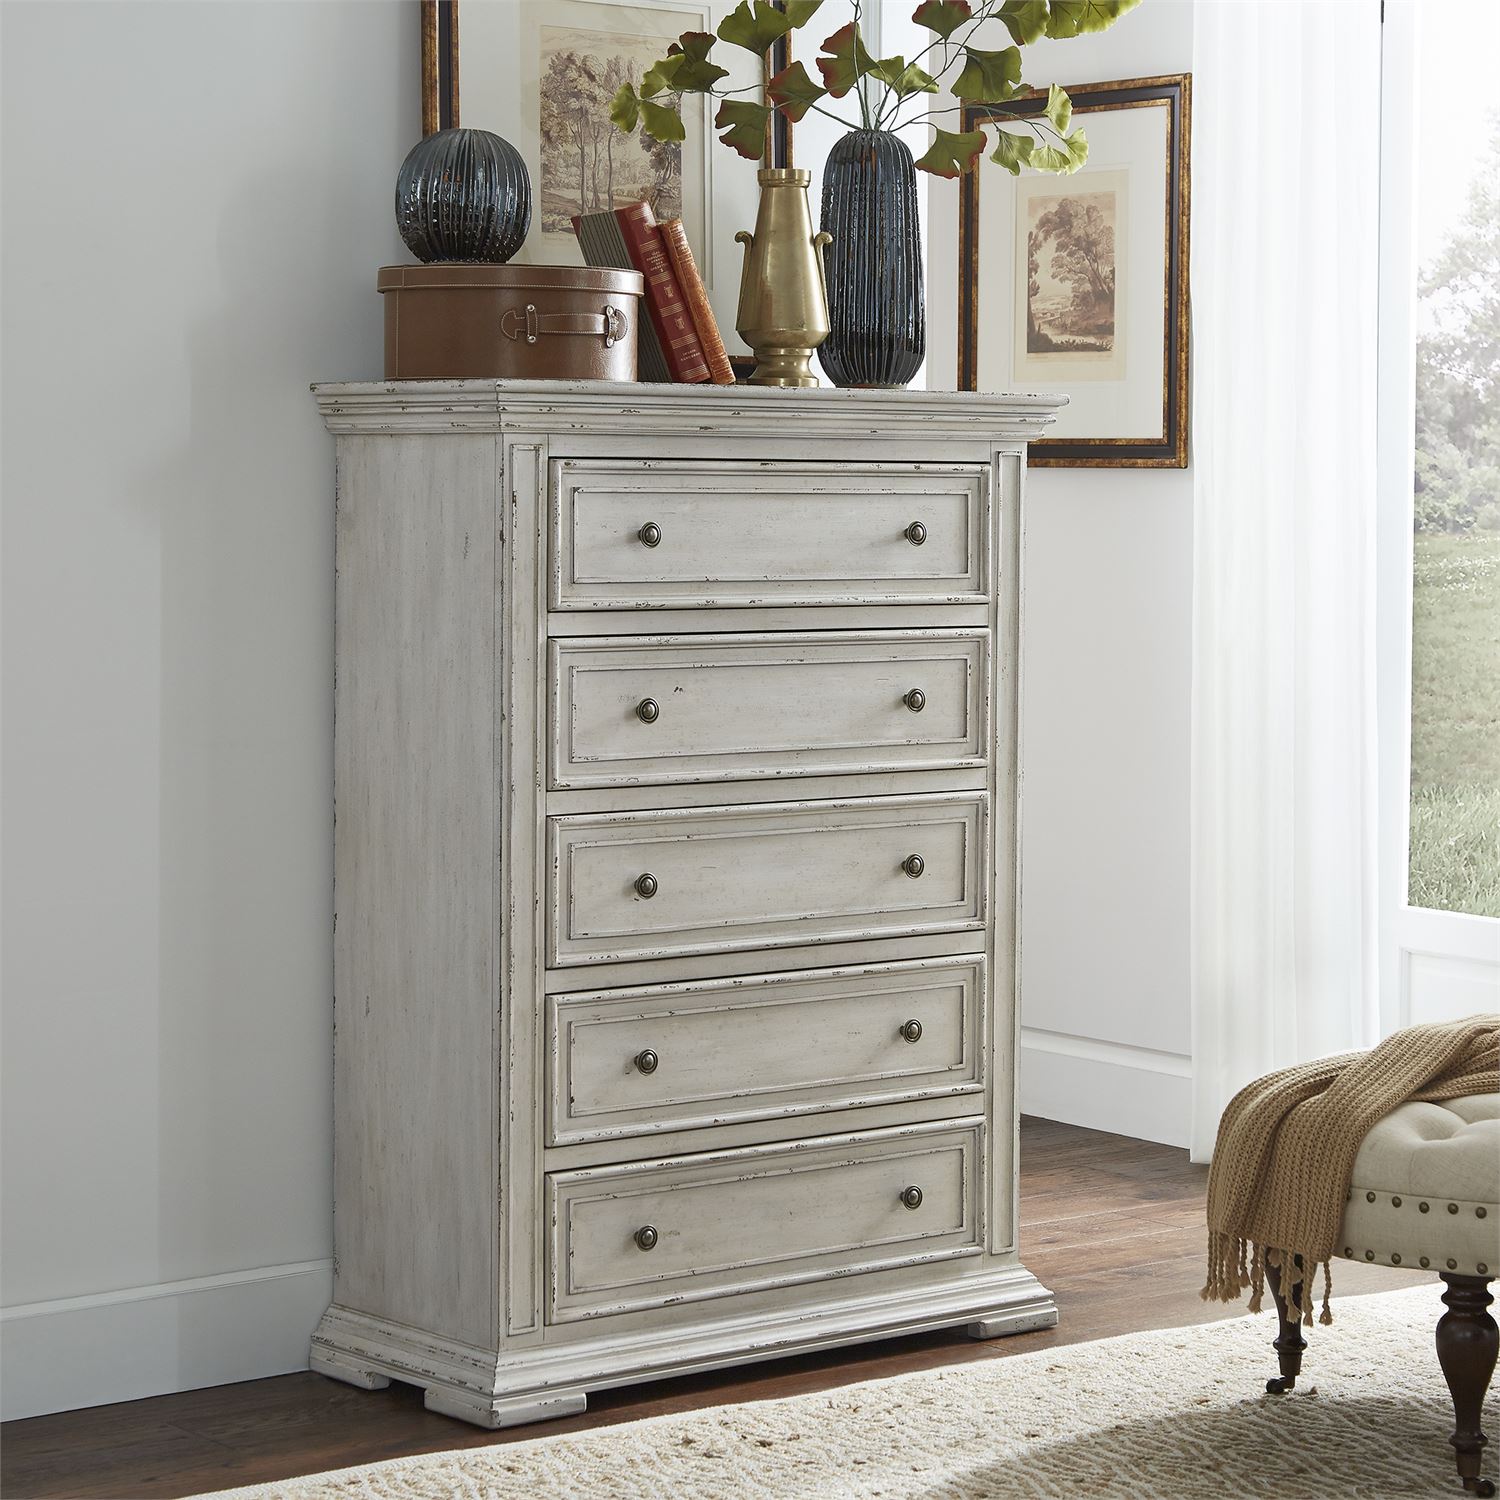 Liberty Furniture Big Valley Whitestone Finish with Heavy Distressing 5 Drawer Chest